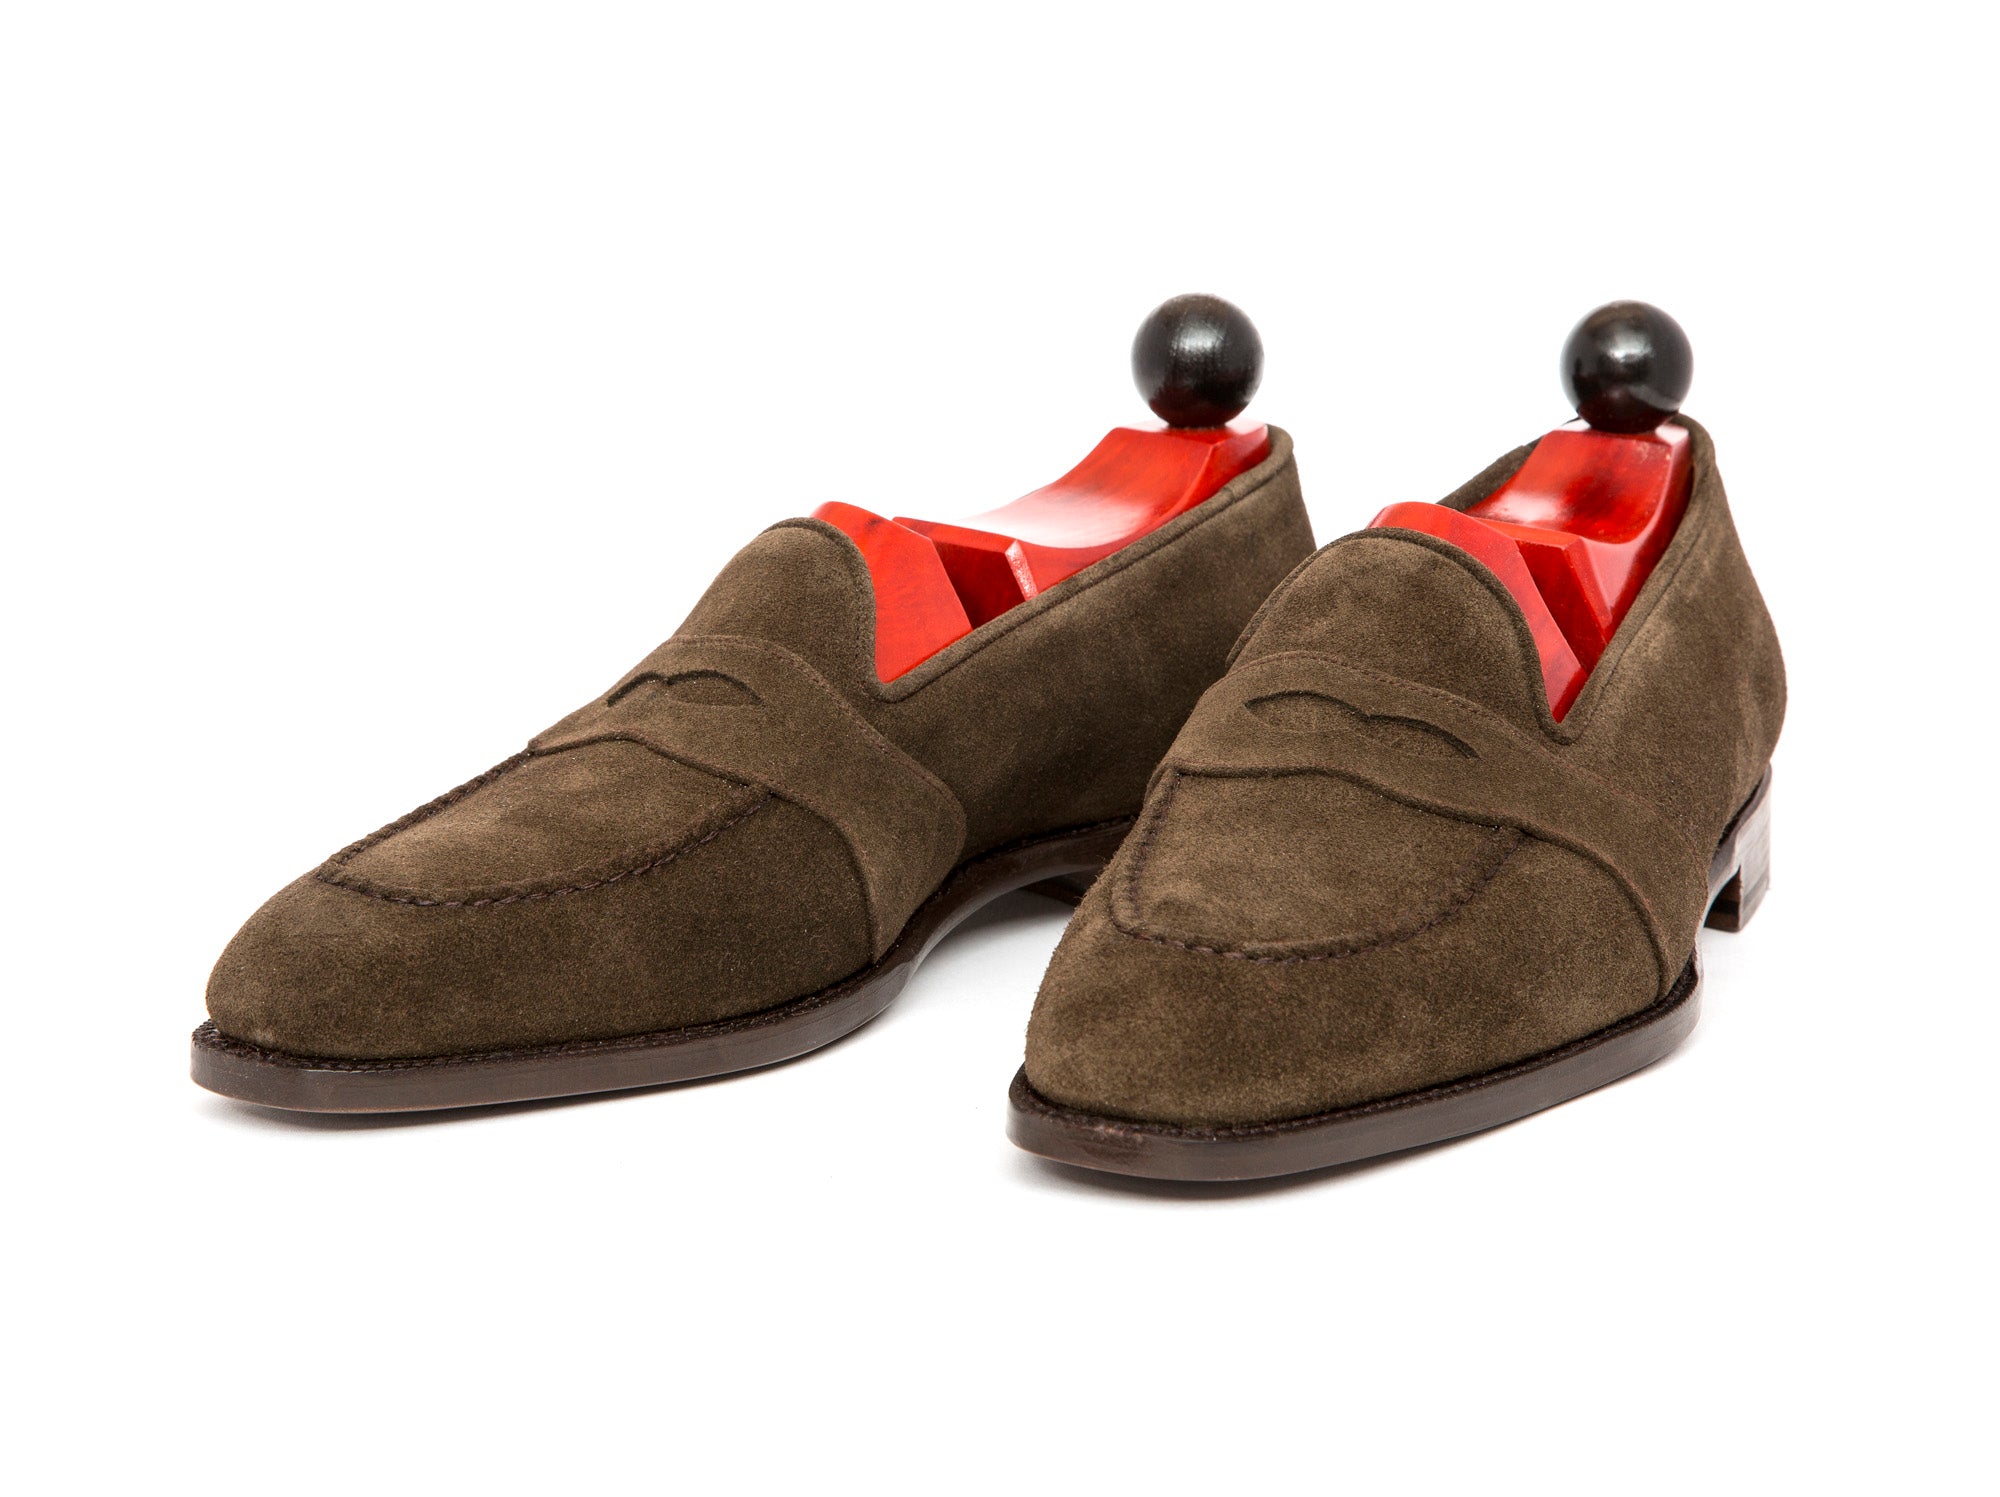 Madison - MTO - Moss Suede - LPB Last - Single Leather Sole